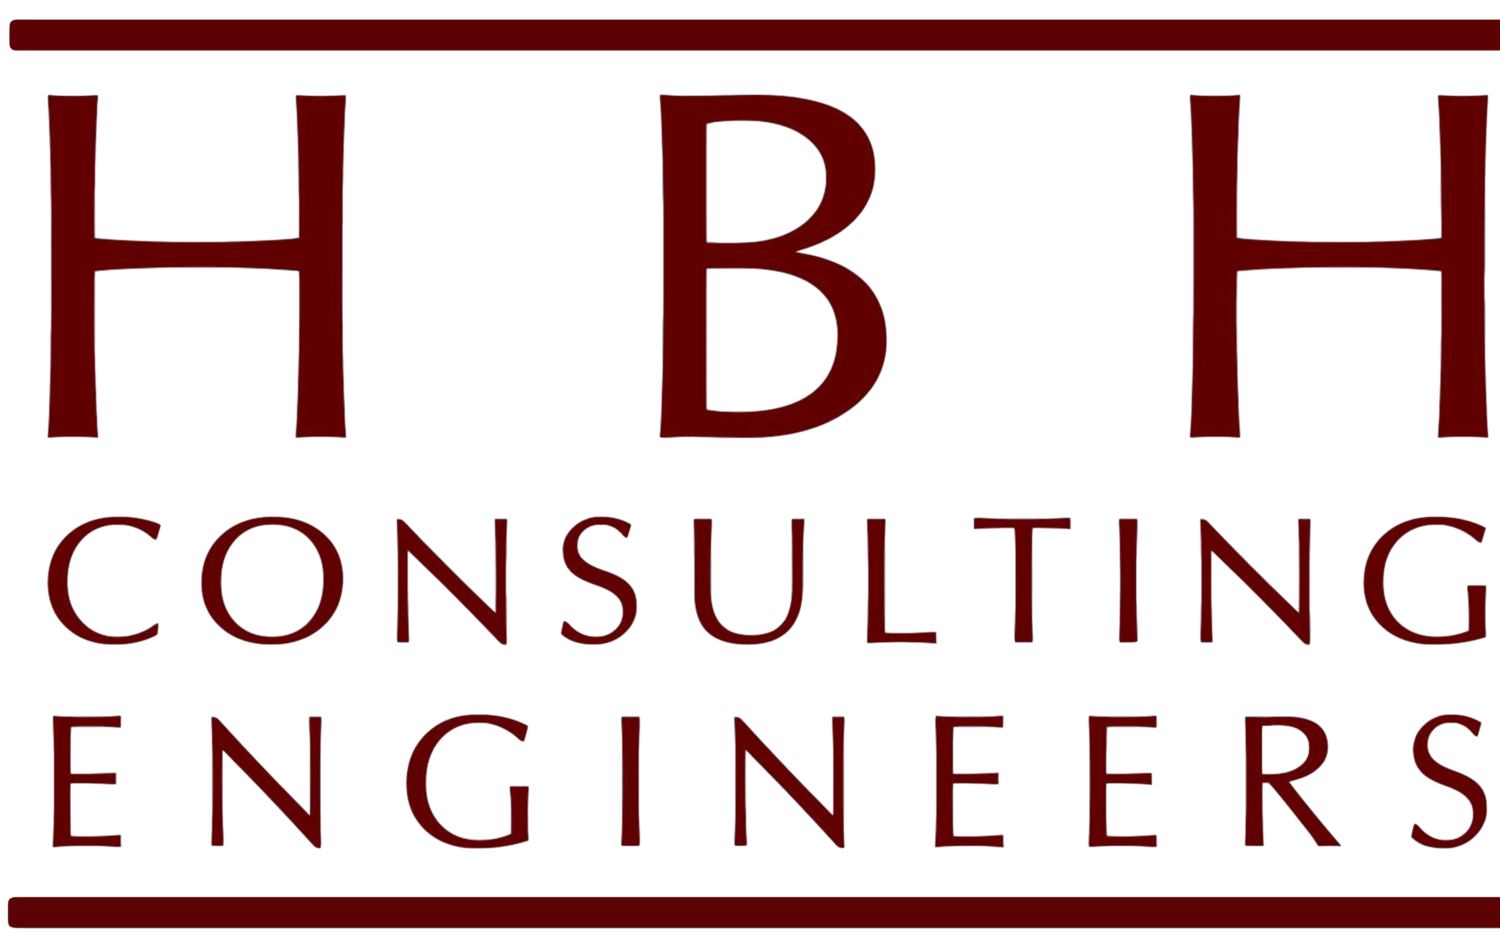 HBH CONSULTING ENGINEERS